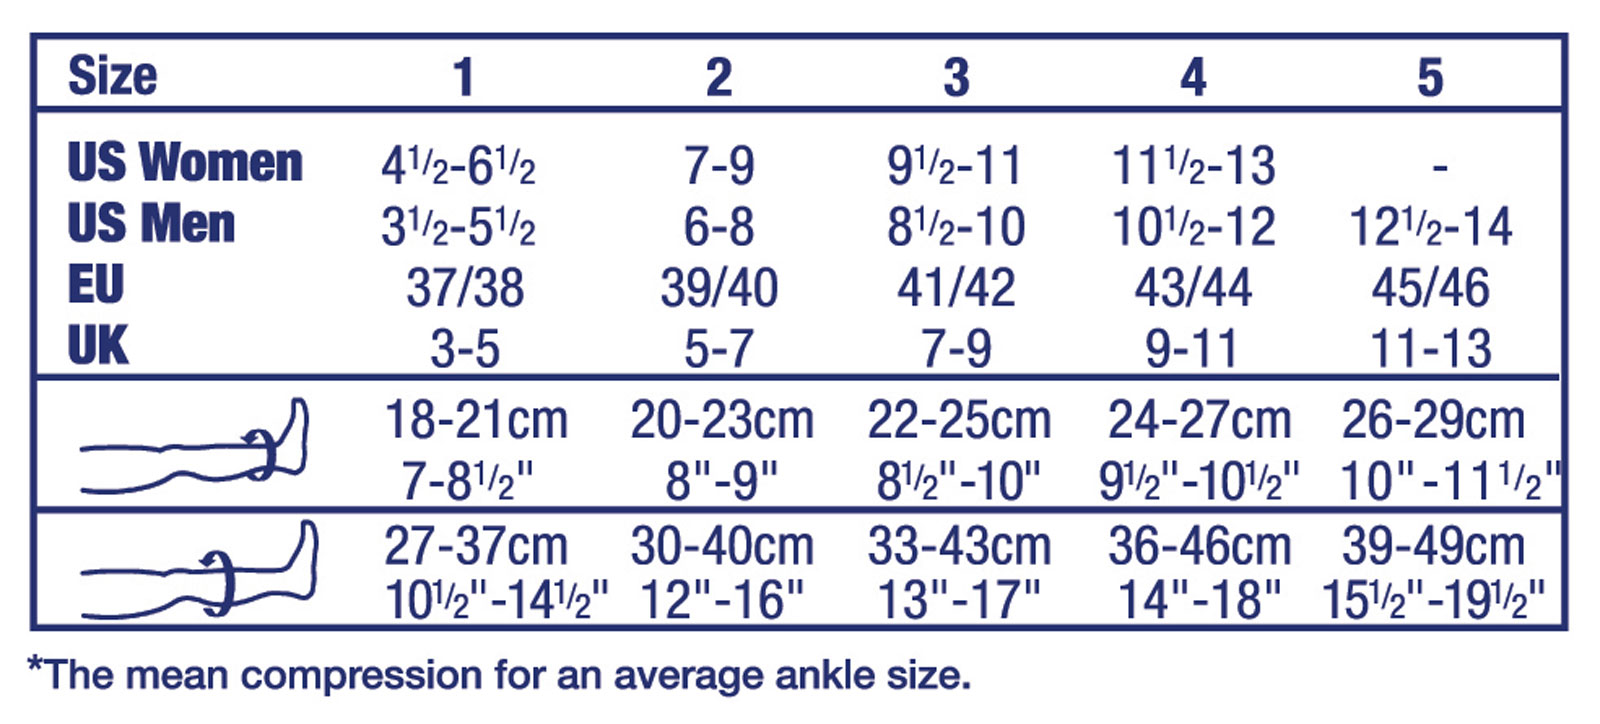 Jobst Support Size Chart